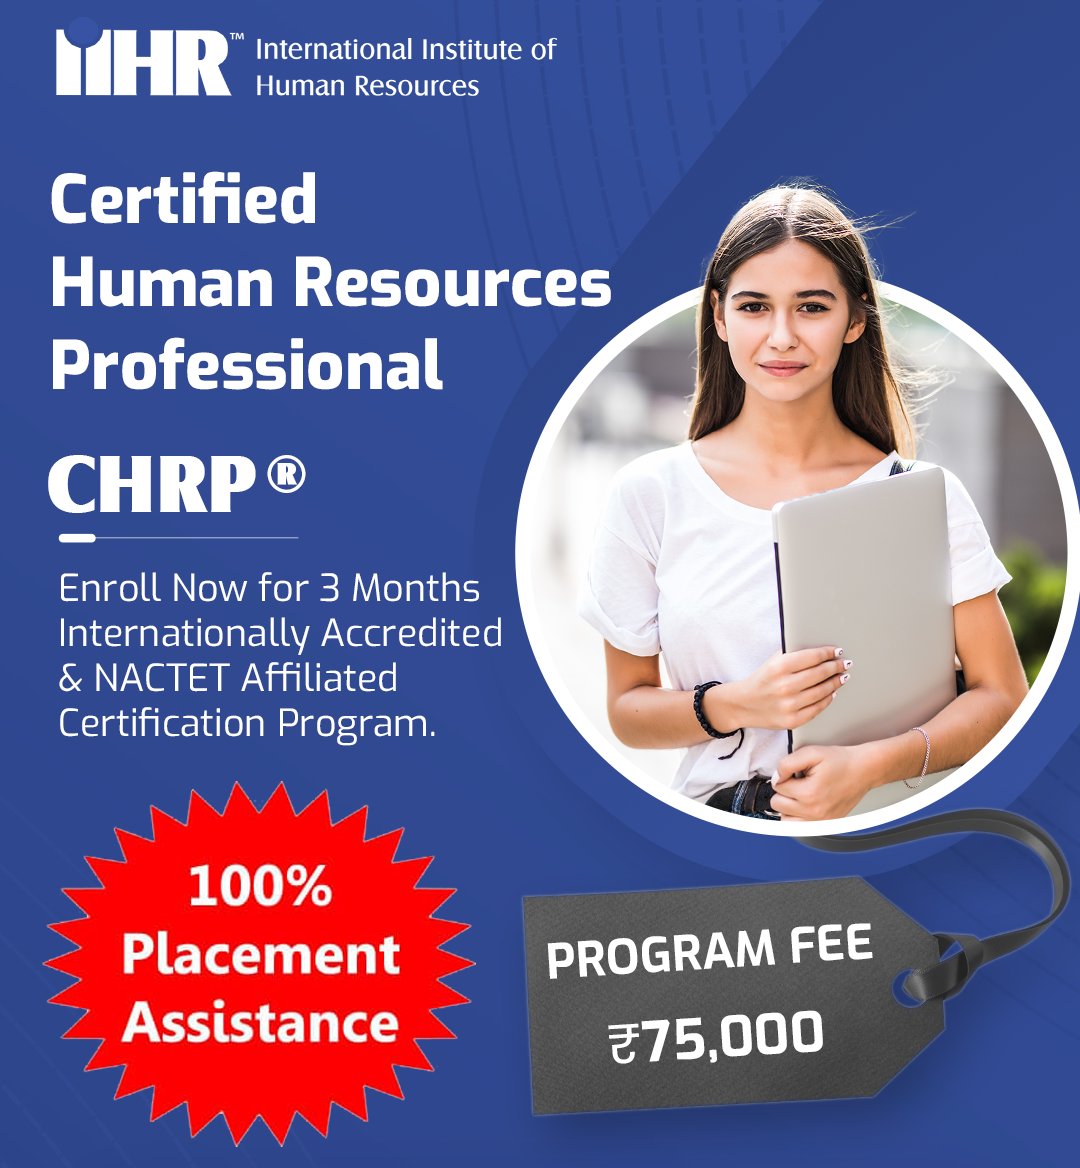 Boost your HR career! Enroll in our Certified Human Resources  Professional Program – 3 Months training with 100% Placement Assistance.  Visit chrp.iihr.edu.in or call/WhatsApp 703 703 4447. #HRProfessional#PlacementAssistance#hrtraining #hrcourses #hrcertifications #iihr